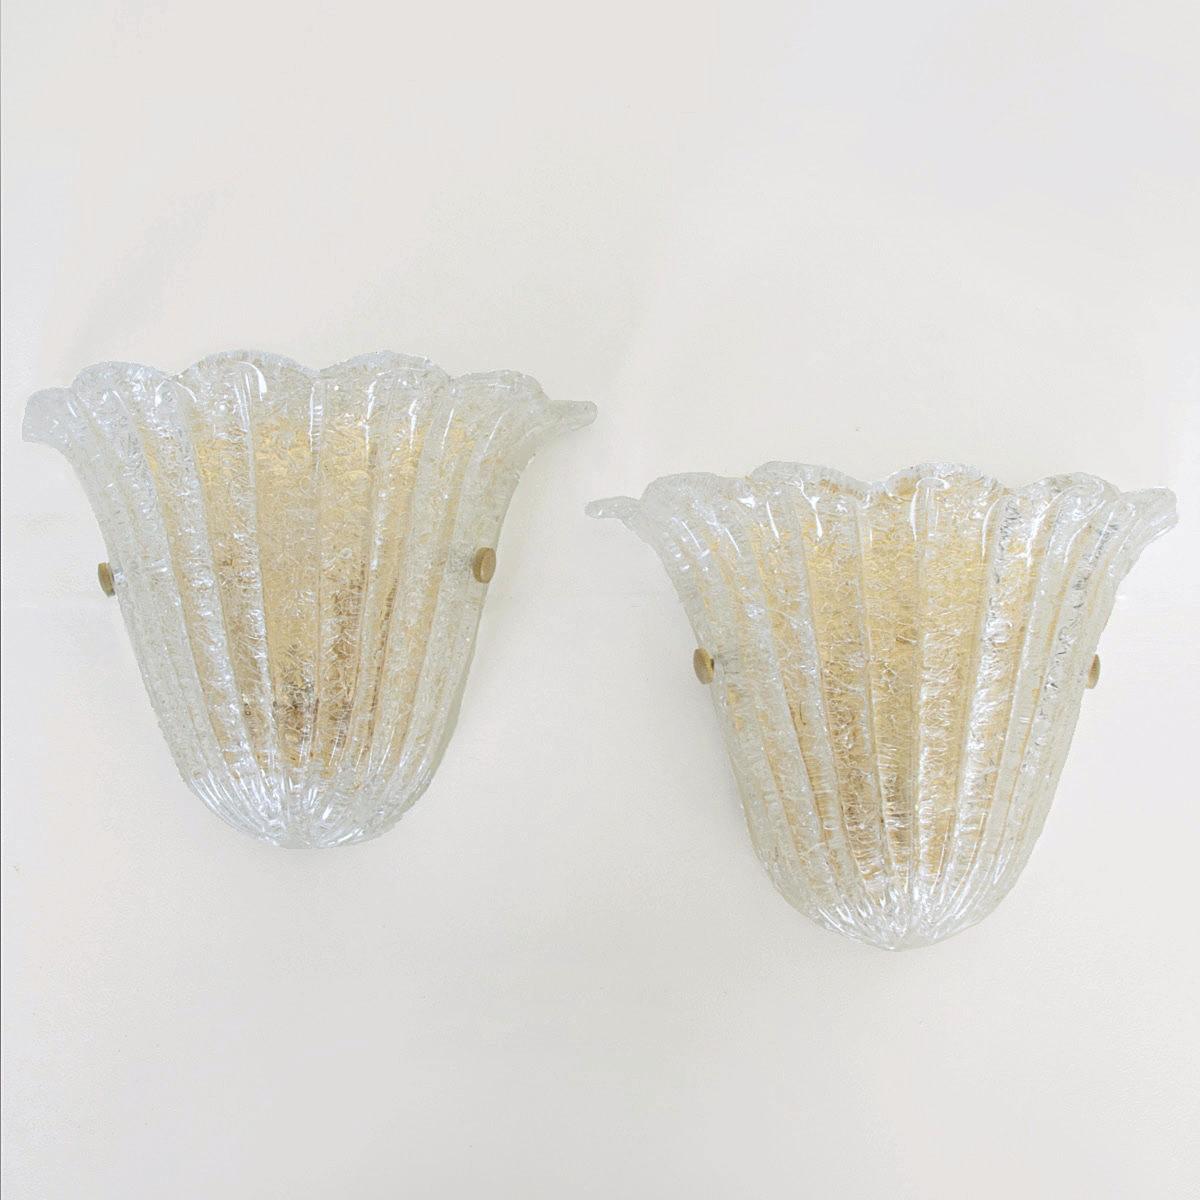 Beautiful pair of glass sconces with scalloped top edge by Barovier & Toso, Italy, 1980's. Ribbed clear class with brass plated back plate. Newly rewired with single socket in each. Illuminates beautifully. 